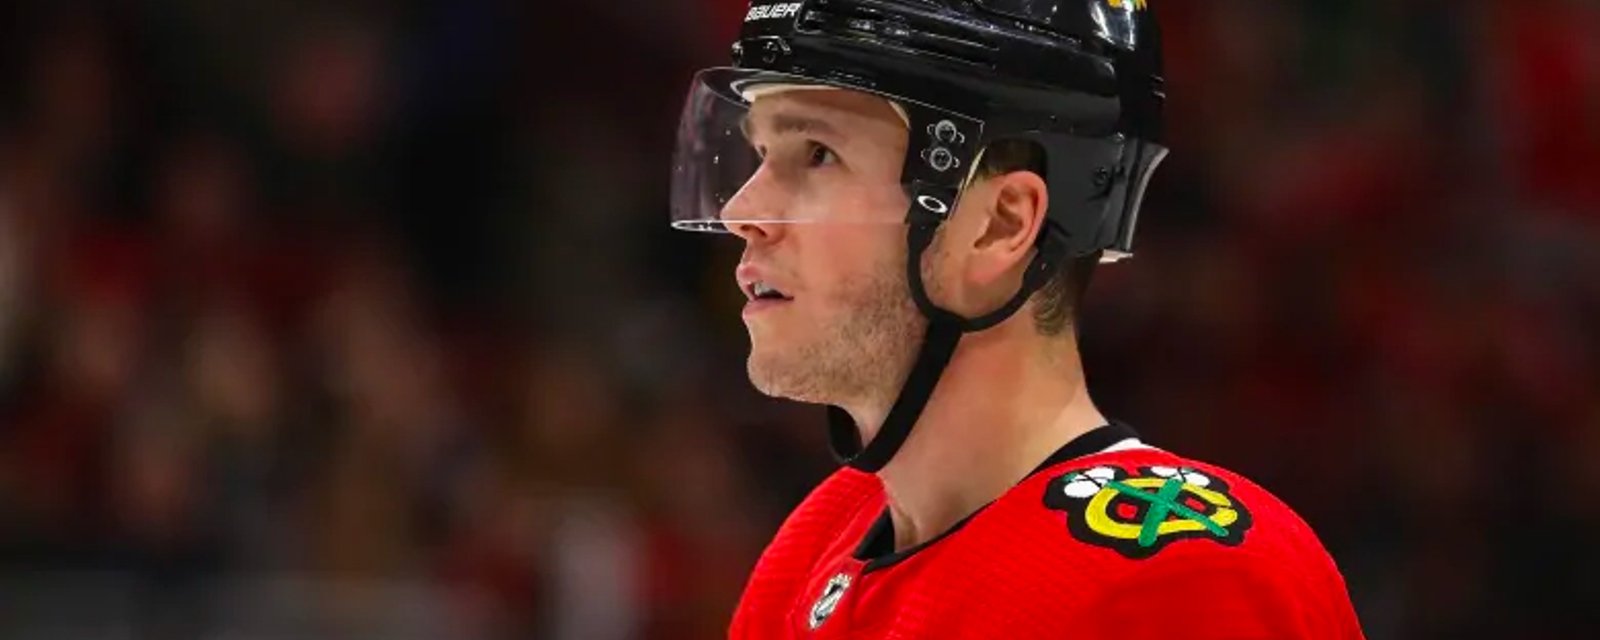 Another confusing update given on Jonathan Toews